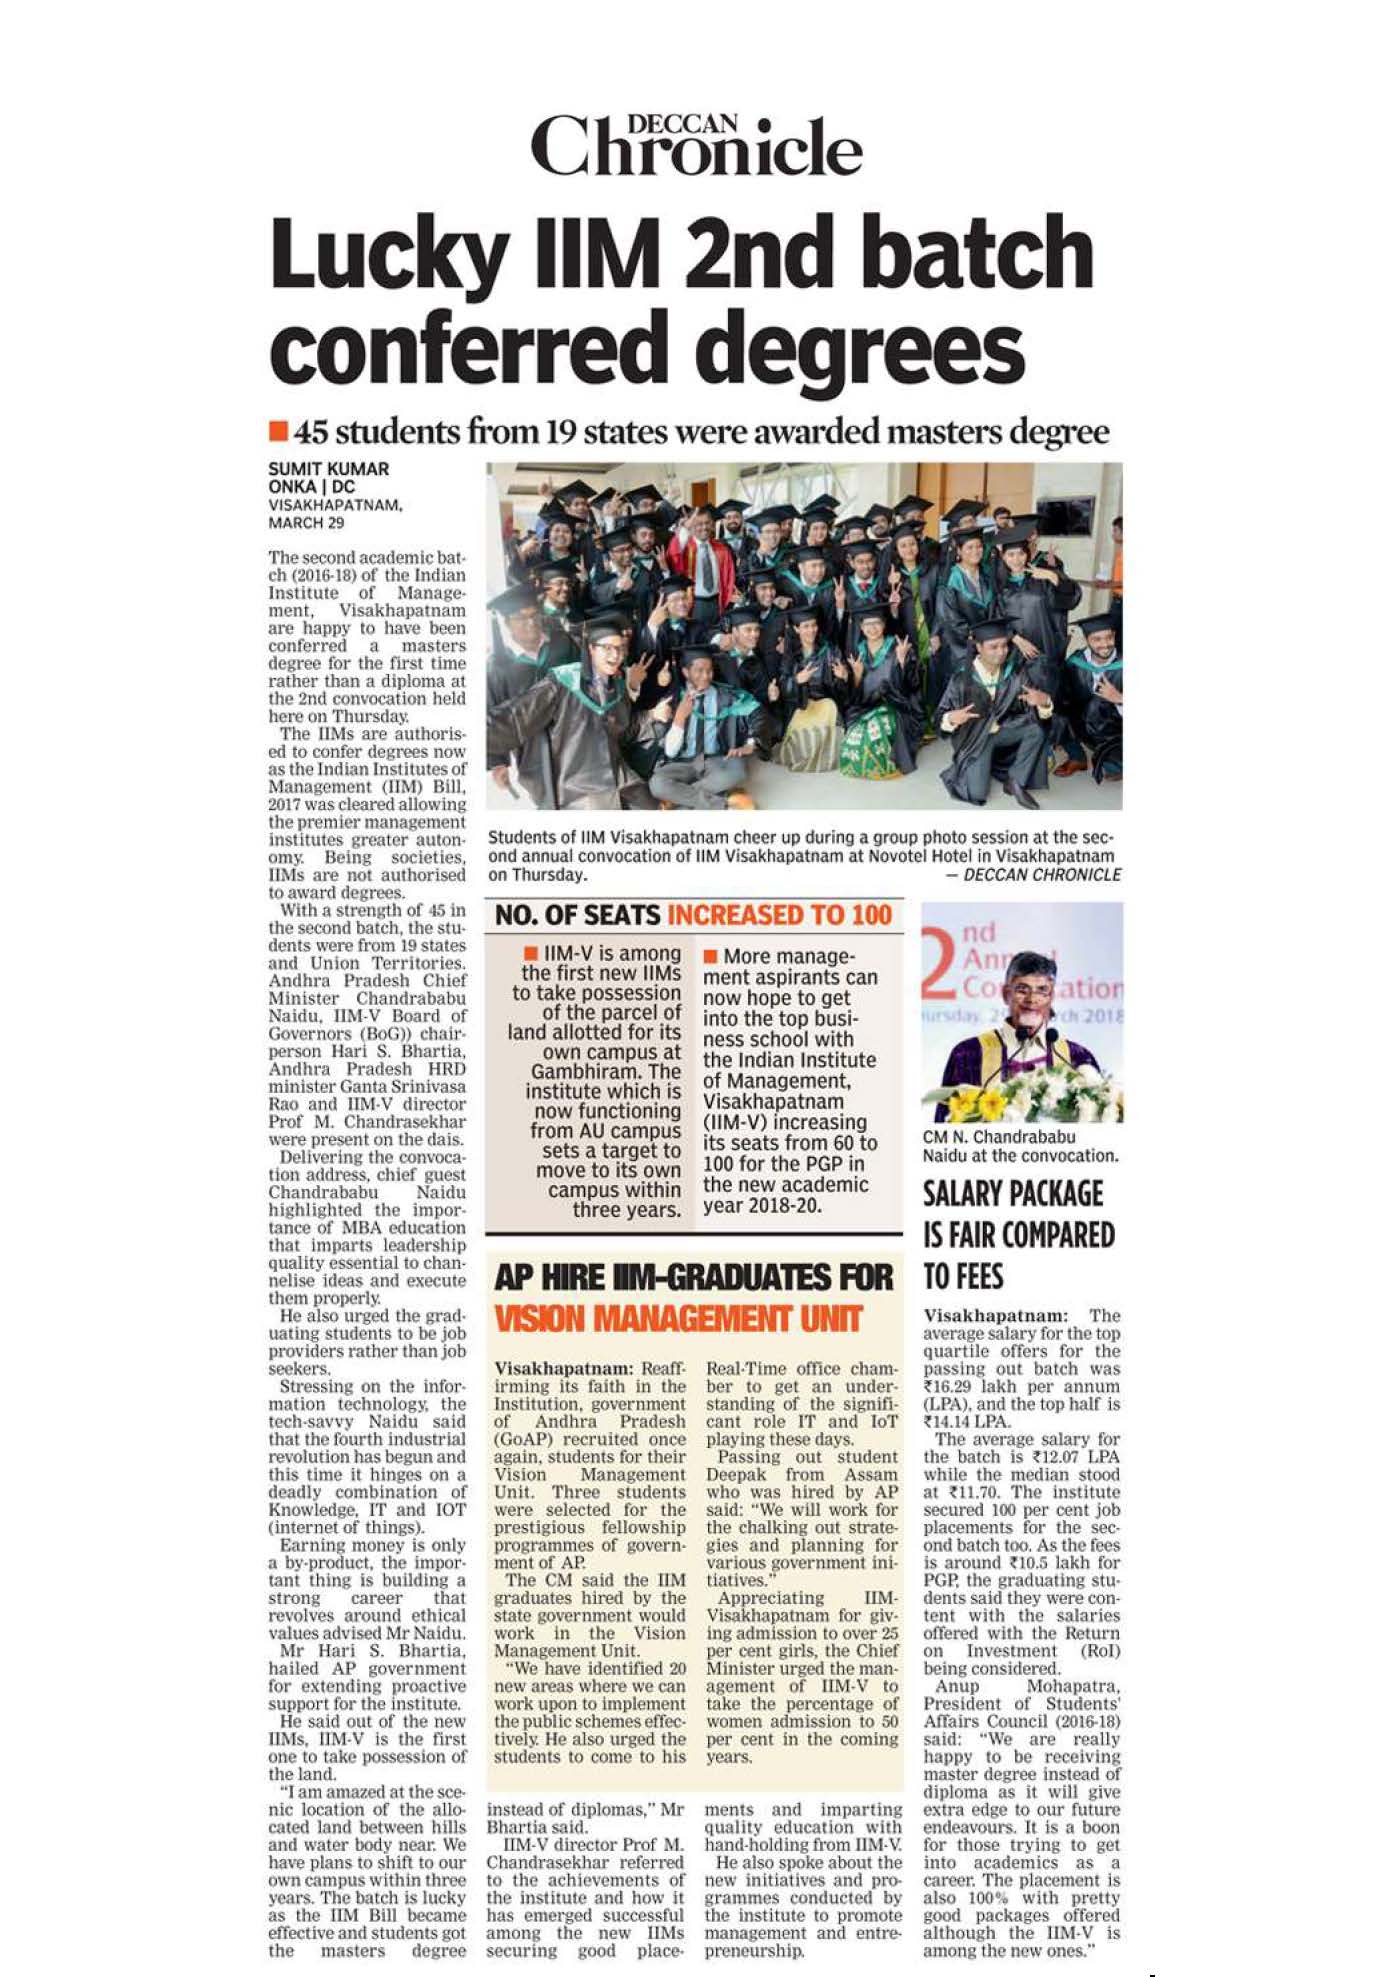 In a first in the region, students of IIM-Vizag awarded MBA degrees instead of diplomas - 30.03.2018